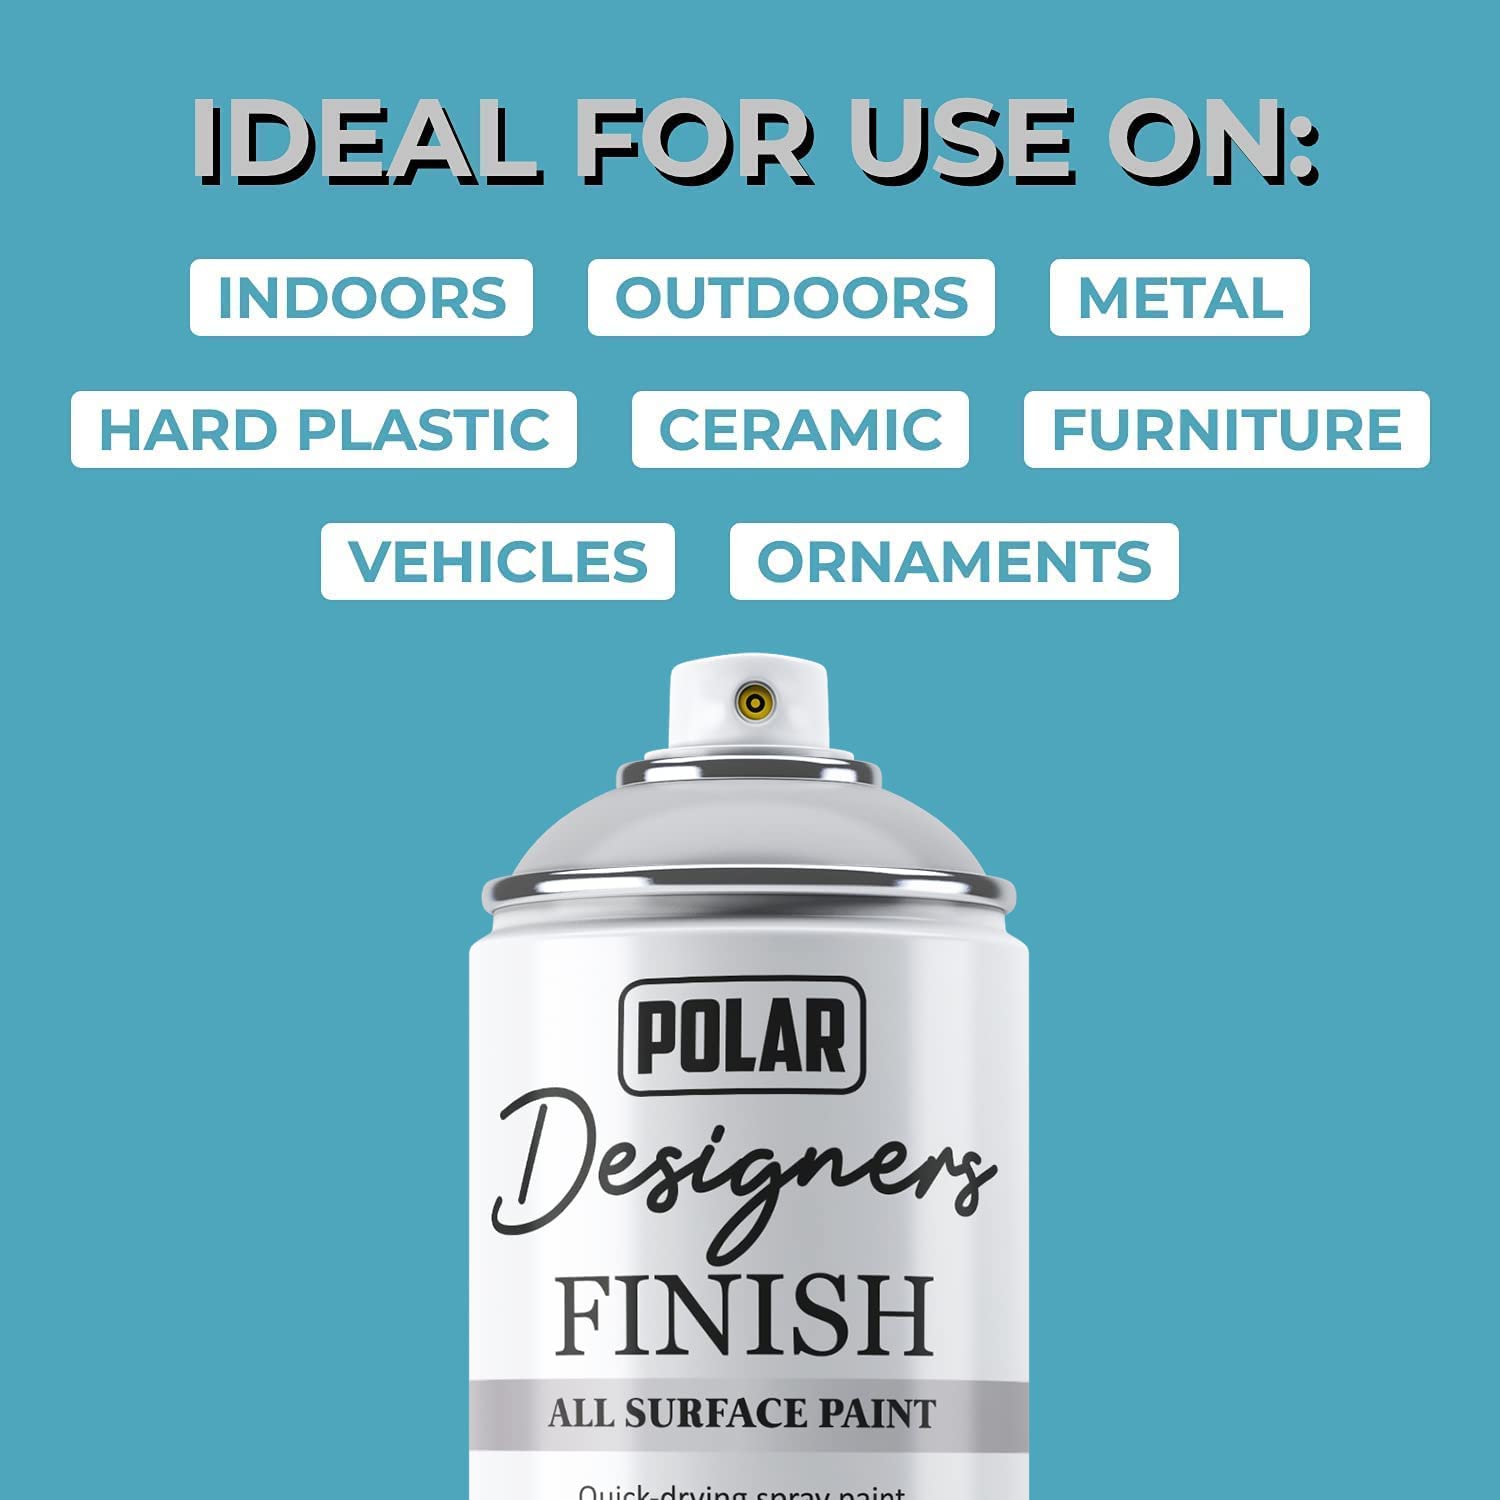 Polar Designers Finish All Surface Spray Paint features